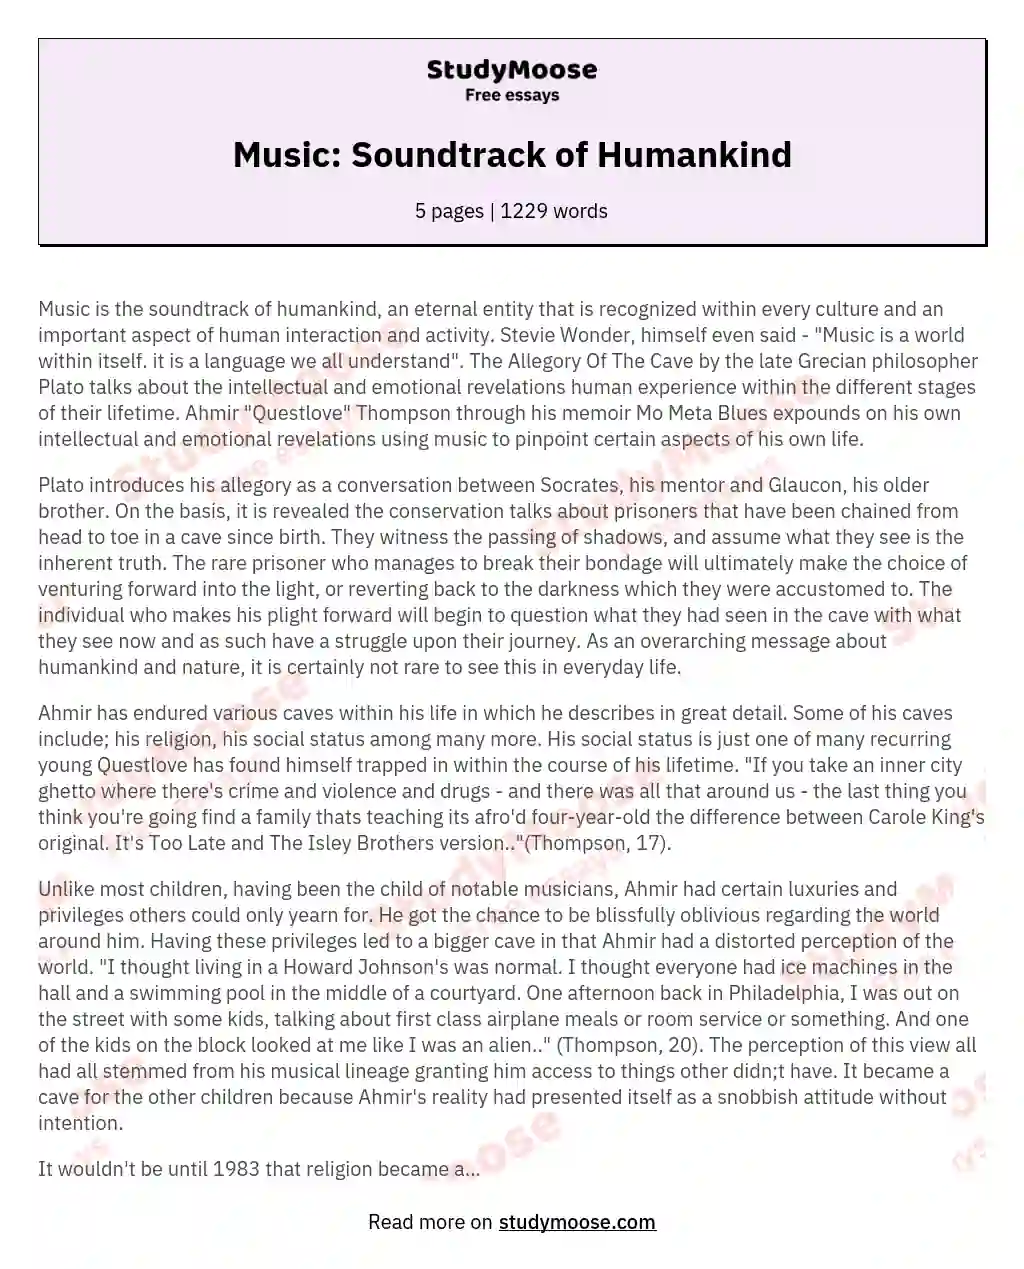 Music: Soundtrack of Humankind